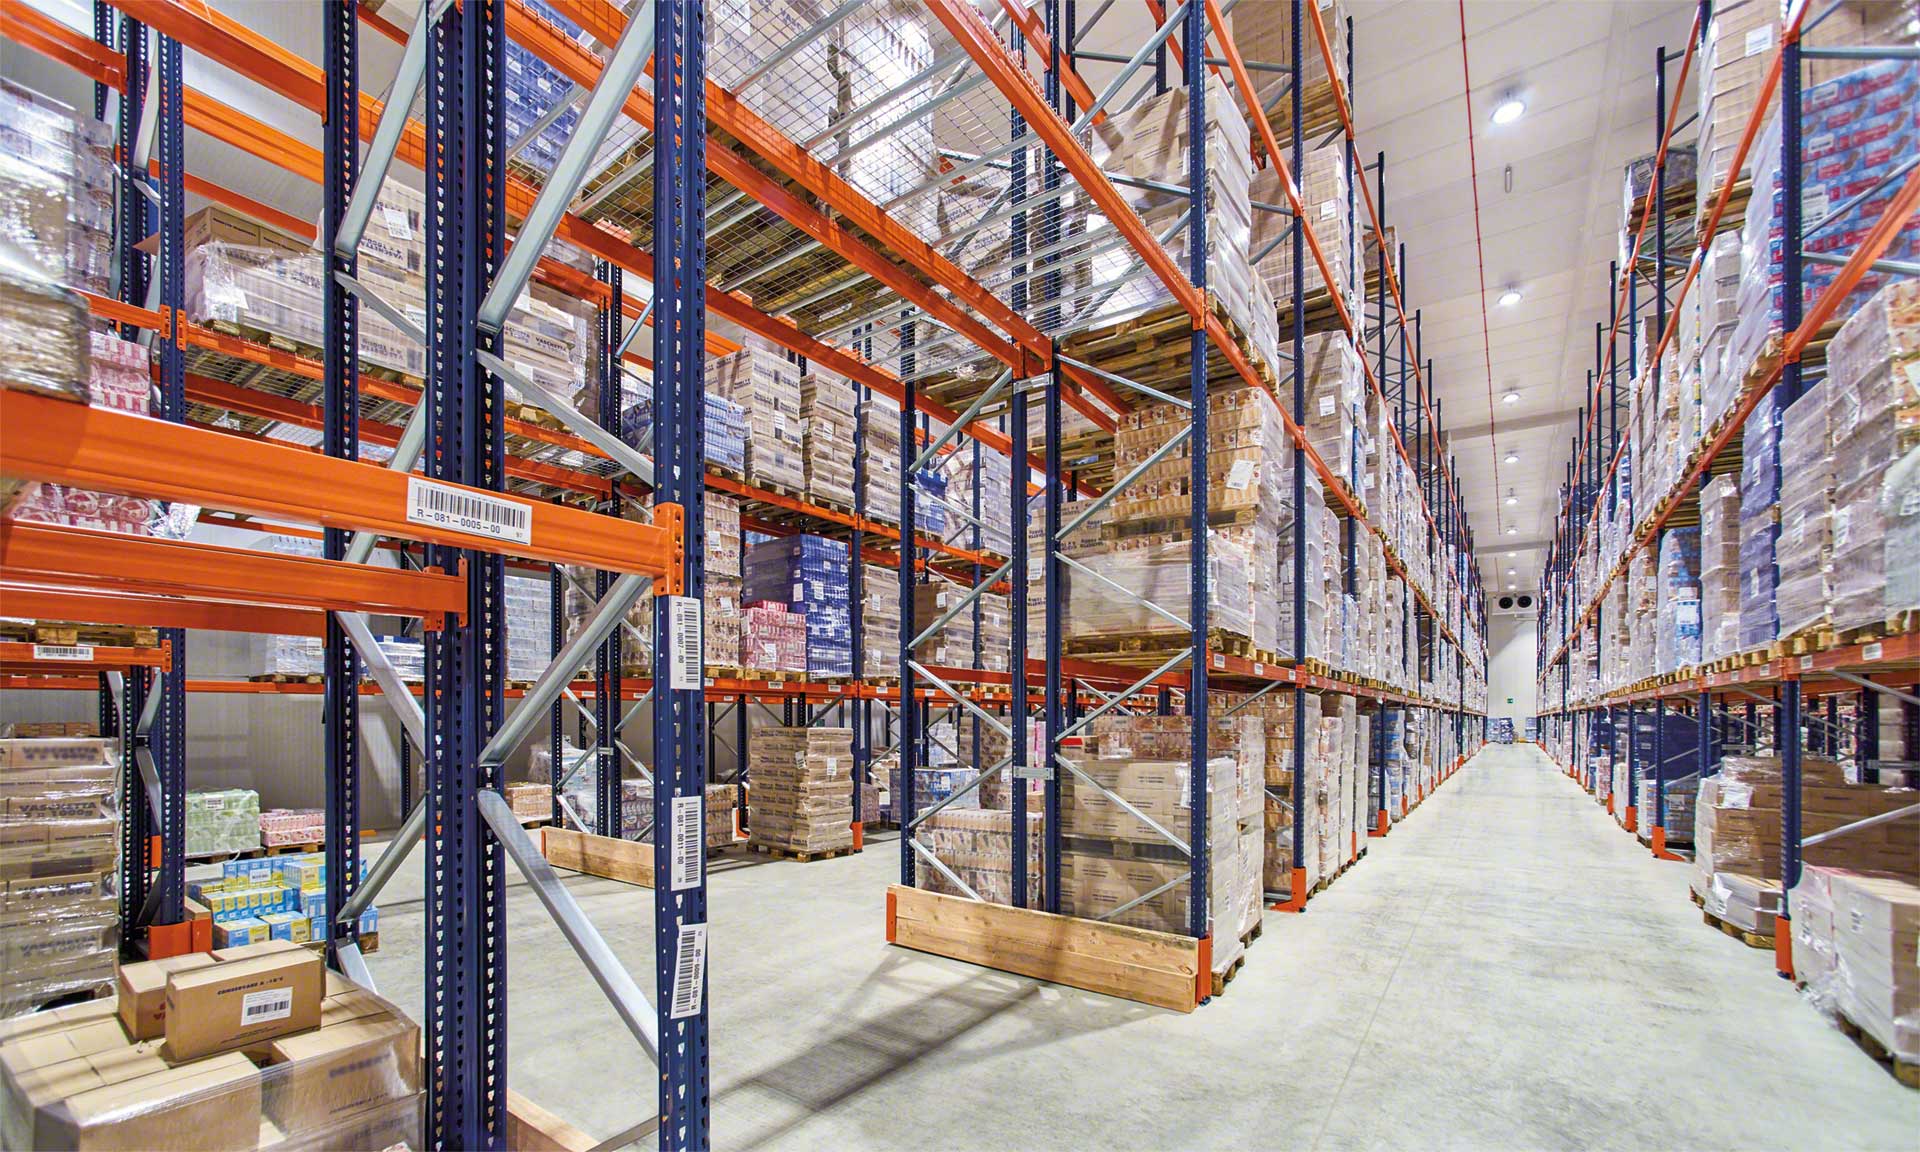 Seismic racking for pallets and their design